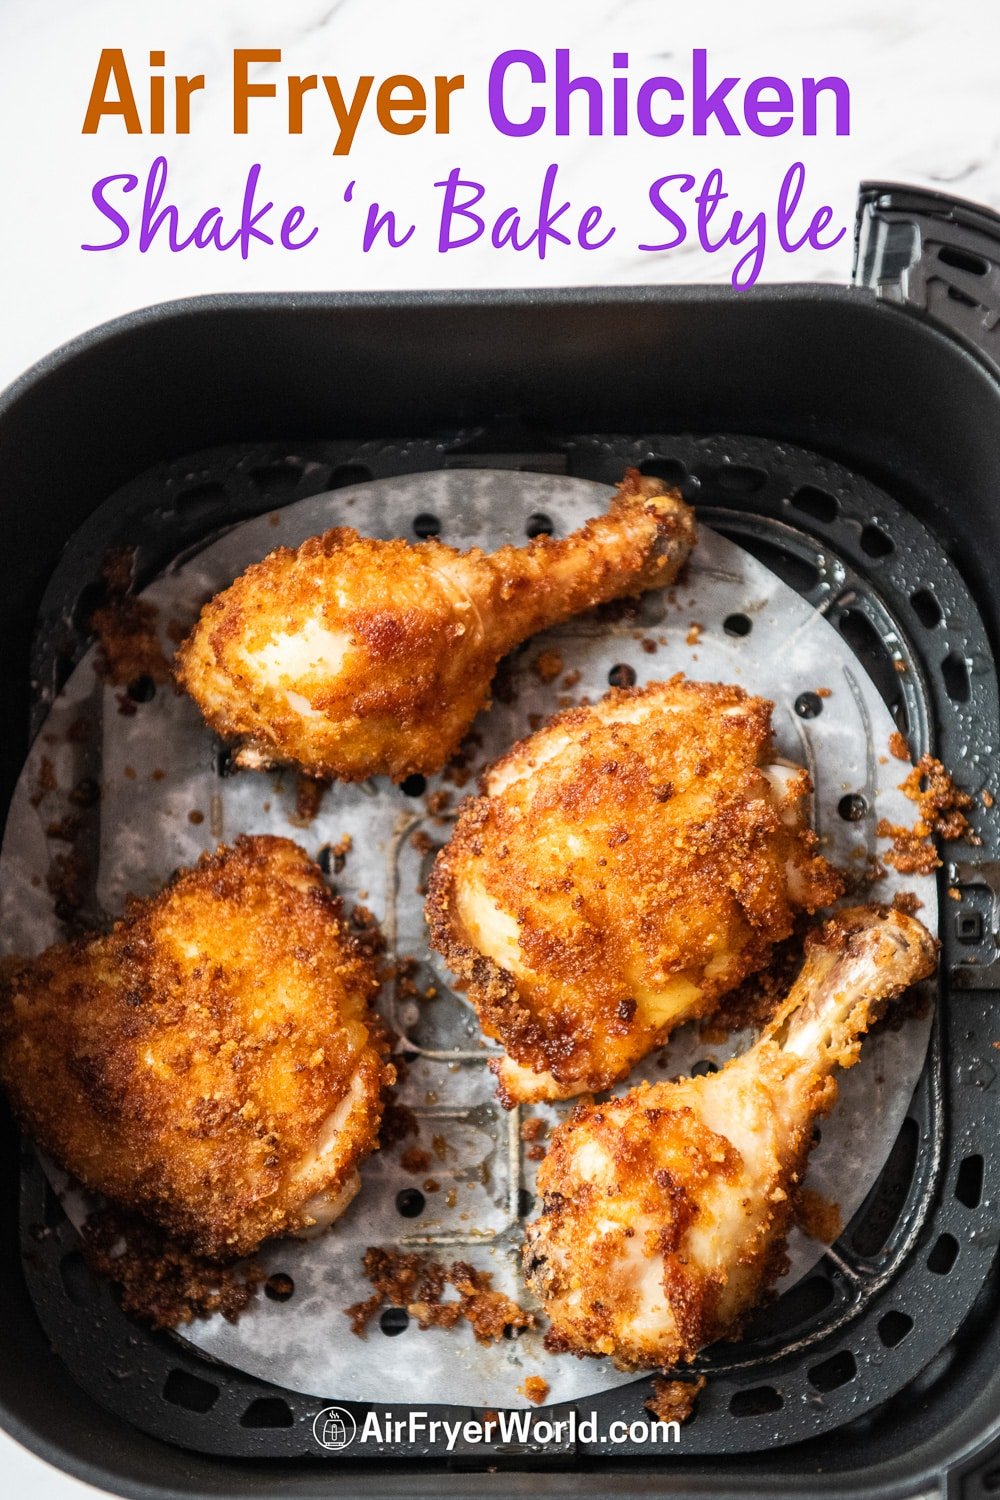 How Long to Cook Chicken Bake in Air Fryer 